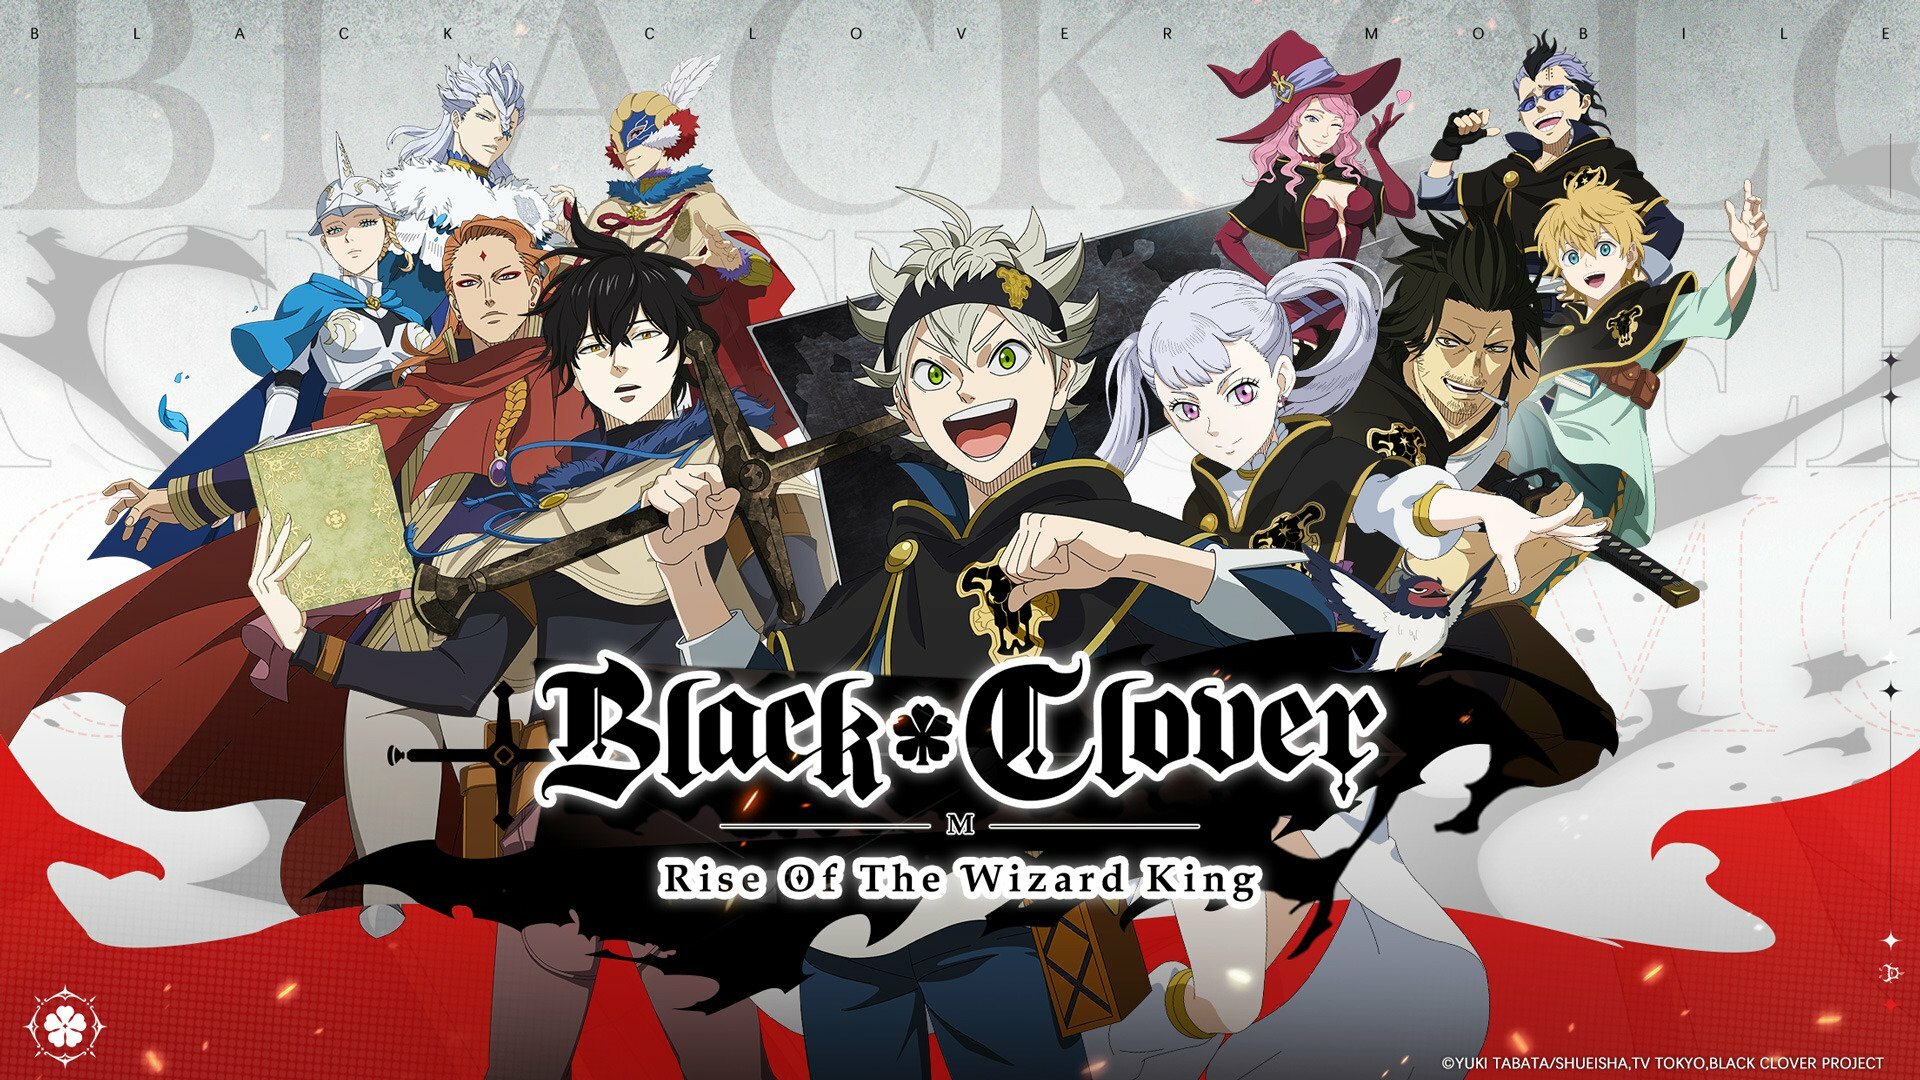 Best Black Clover M mobile character who to get first?